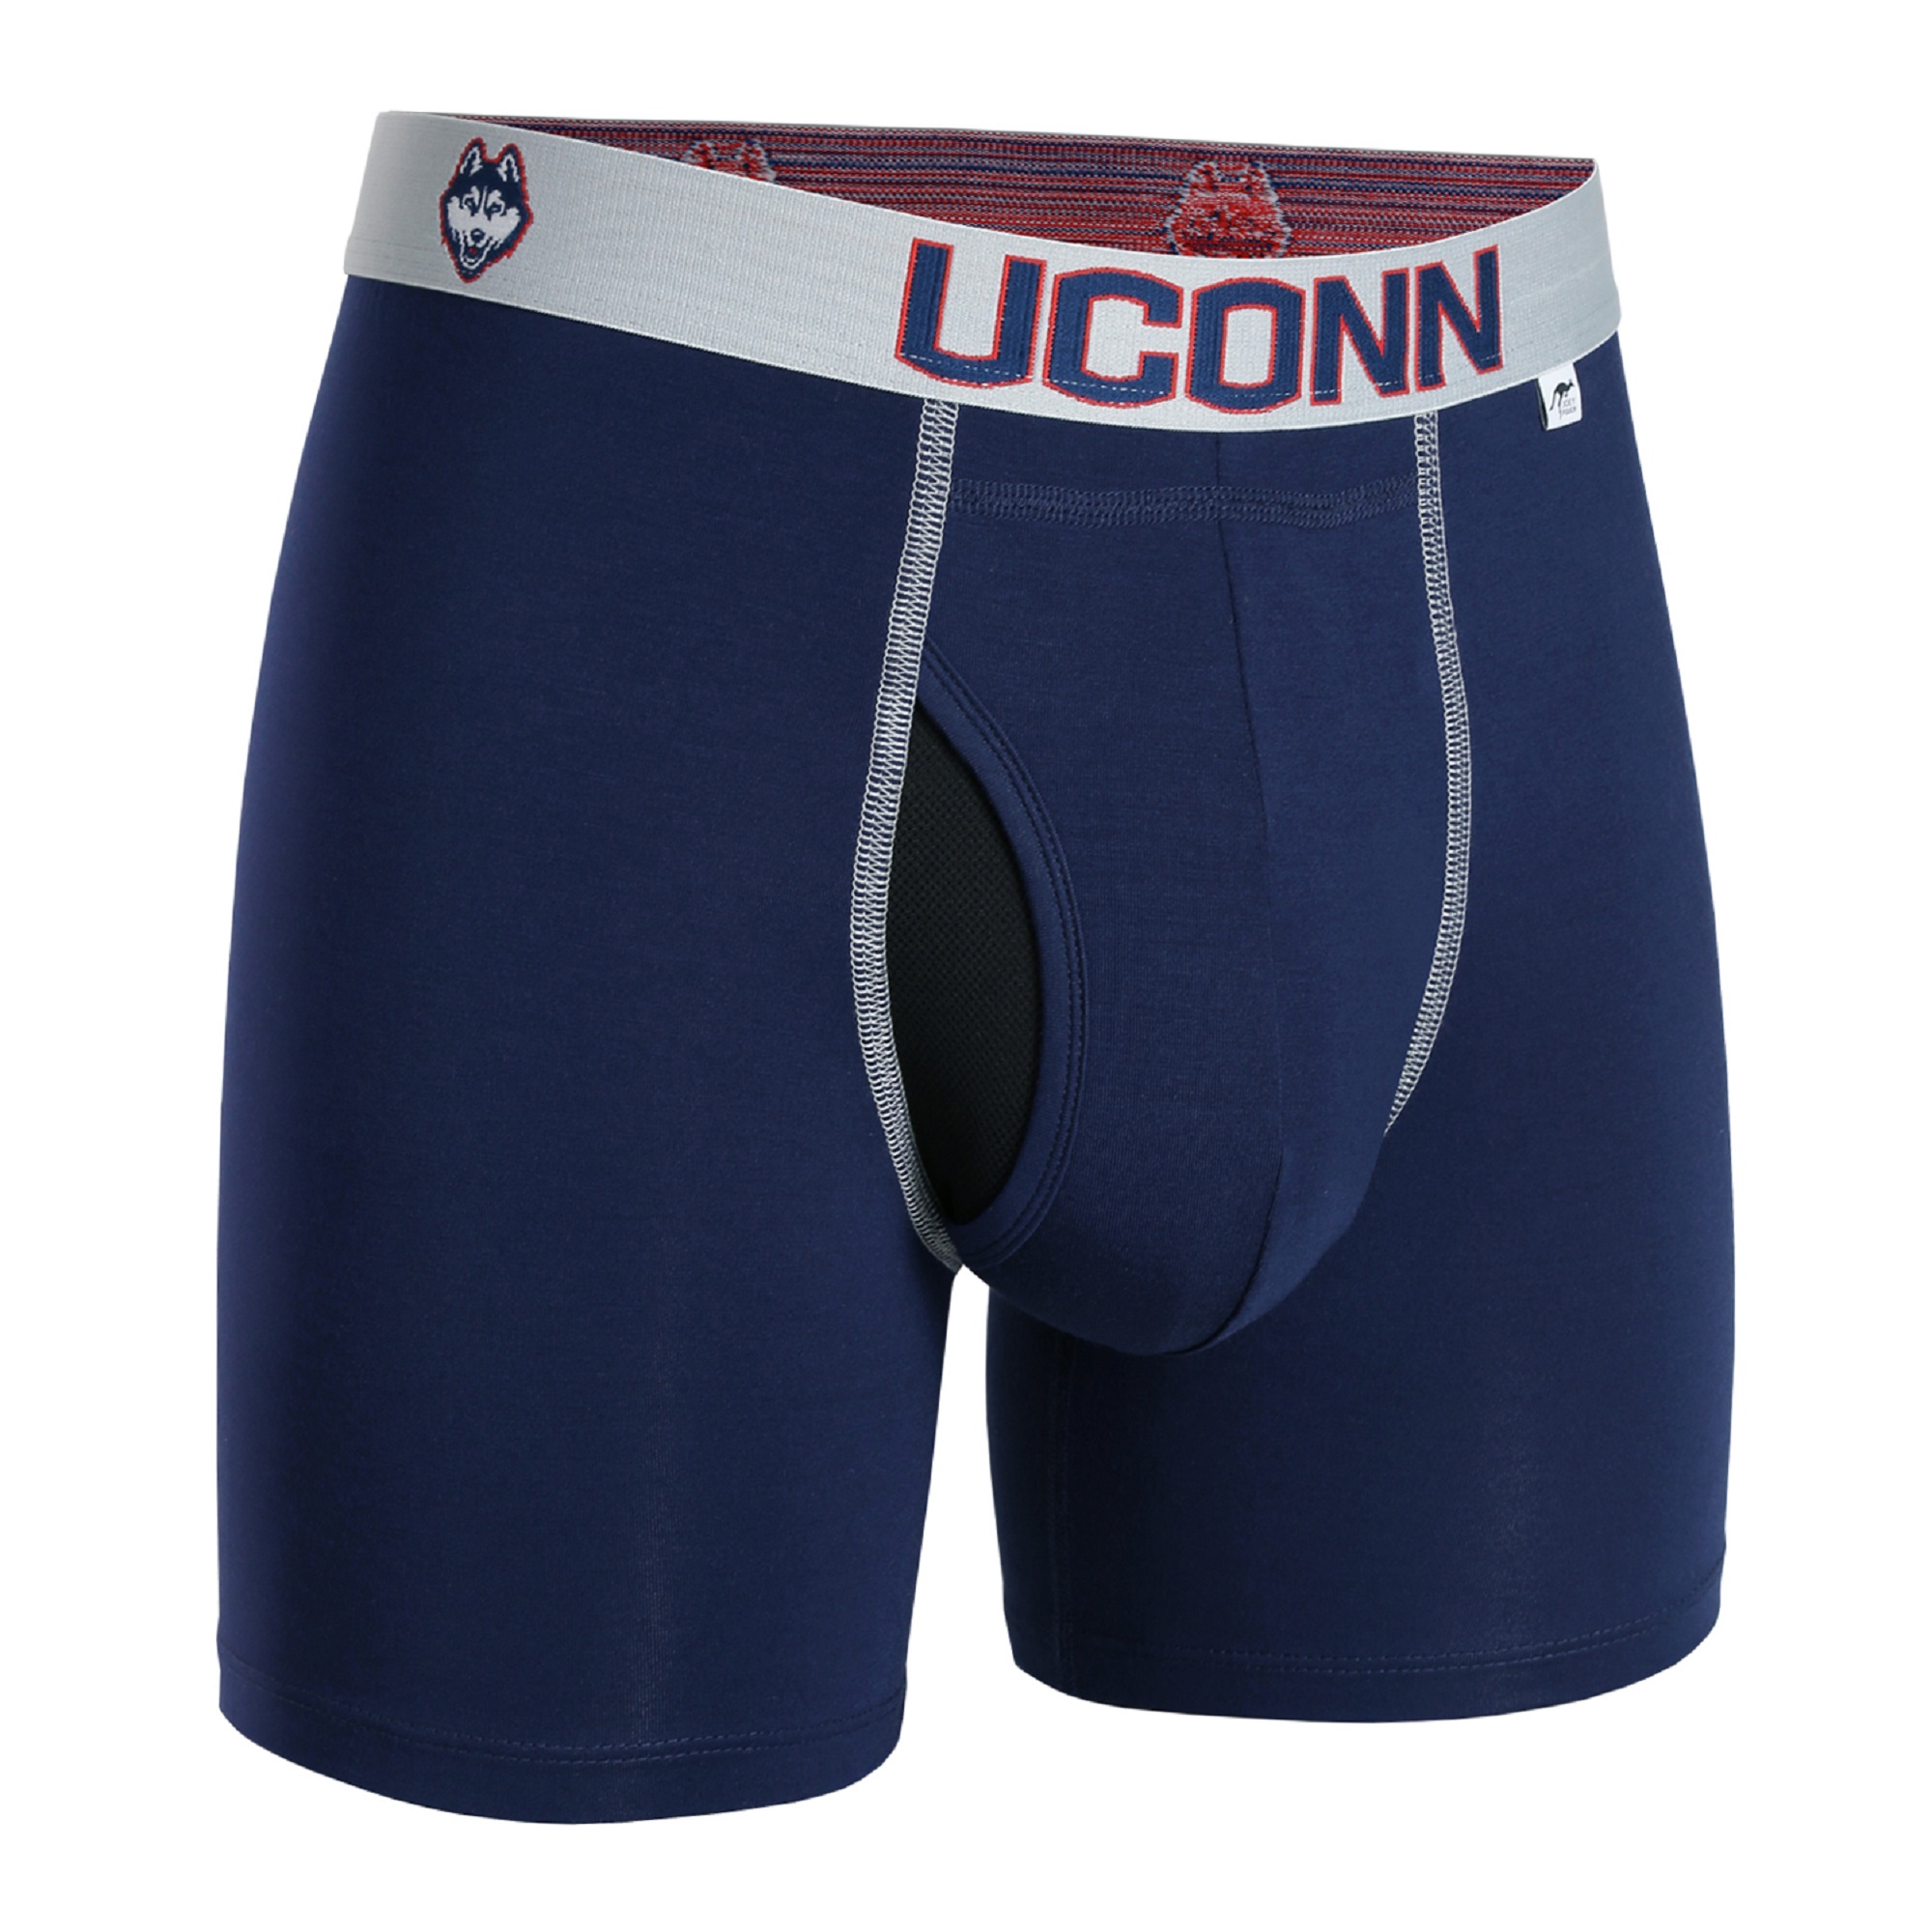 2UNDR NCAA Team Colors Men's Swing Shift Boxers (Connecticut Navy, Large) - image 1 of 5